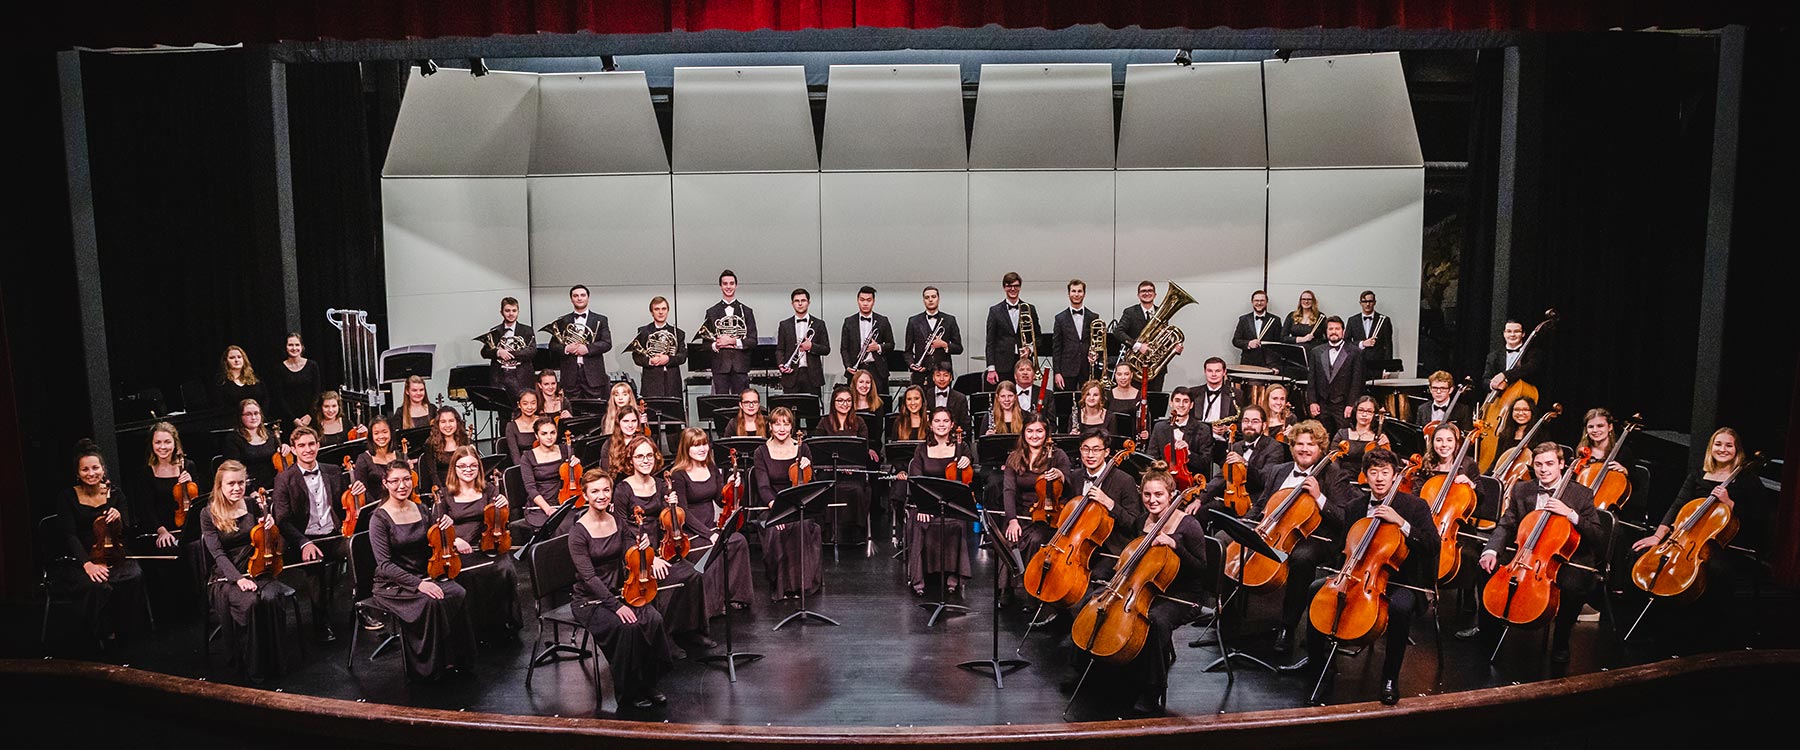 Members of the 2018-19 Whitworth Symphony Orchestra.